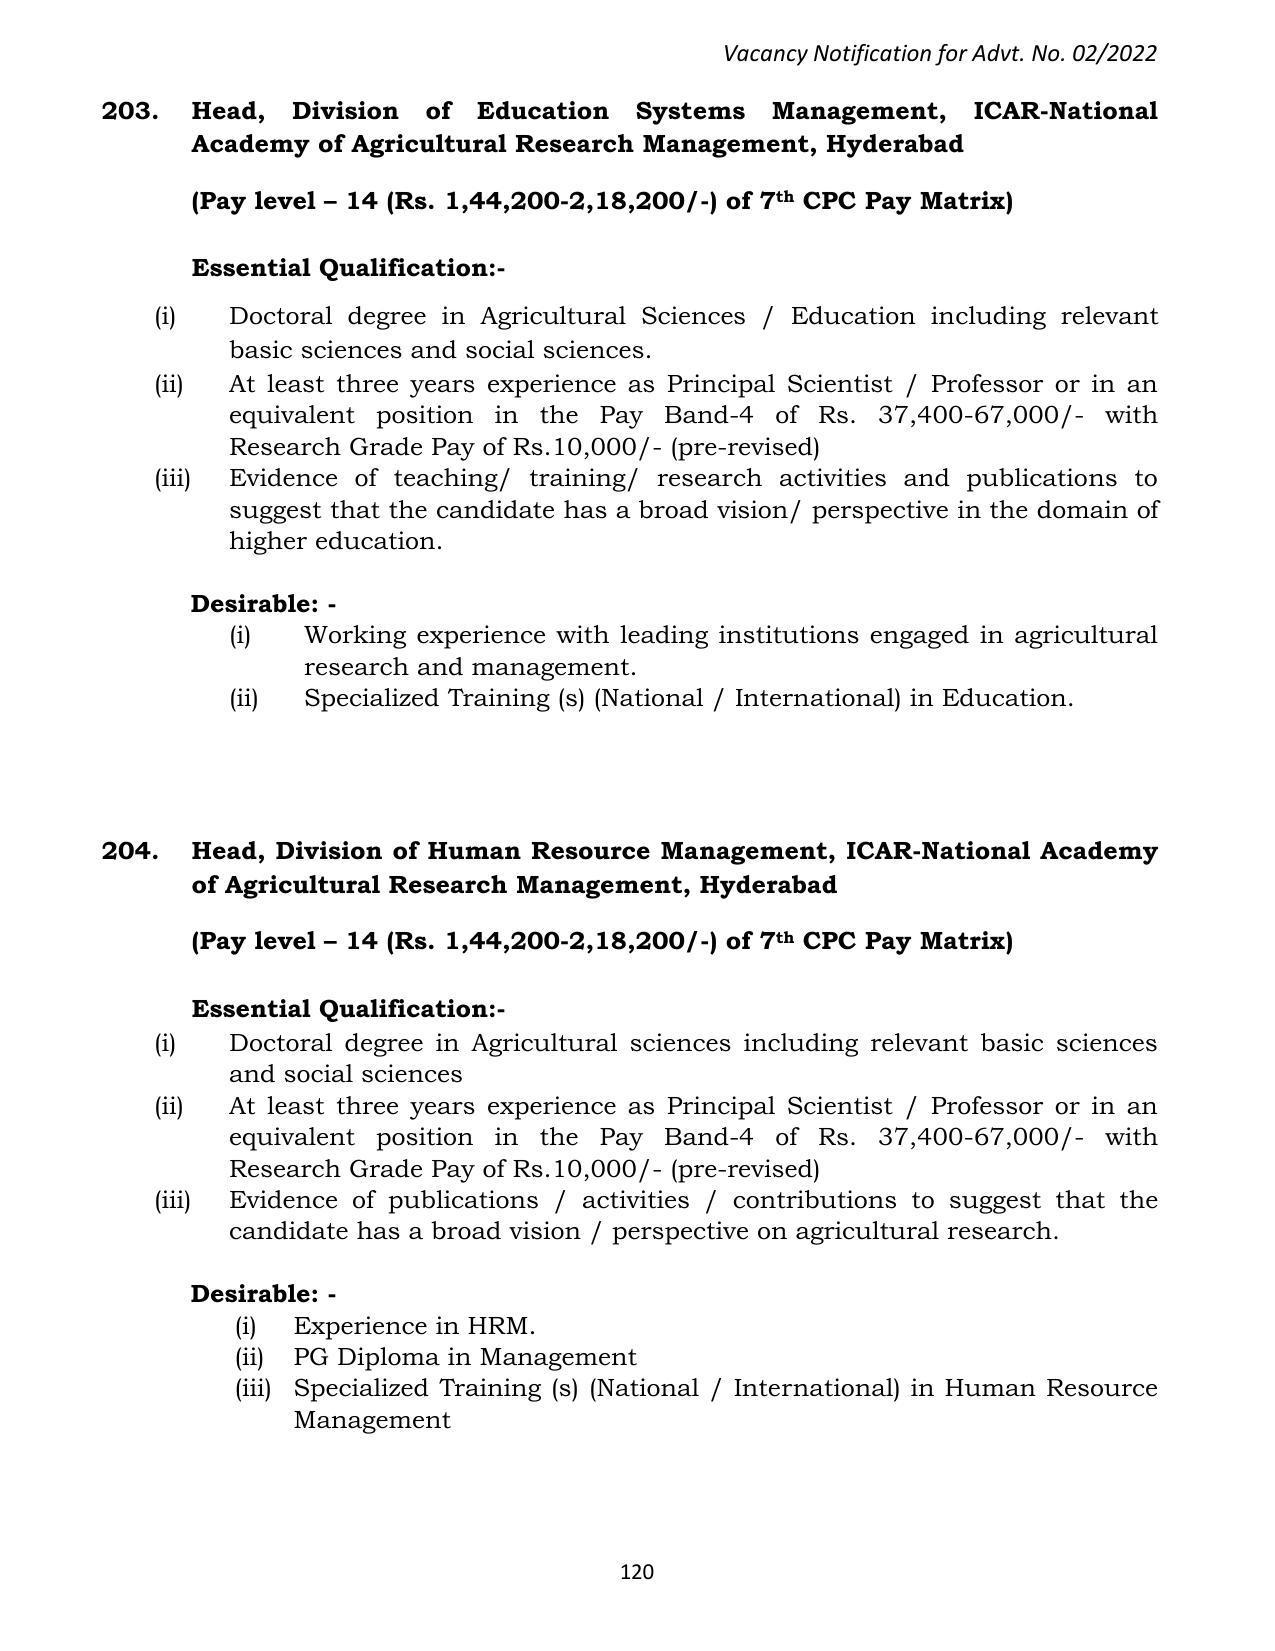 ASRB Non-Research Management Recruitment 2022 - Page 2